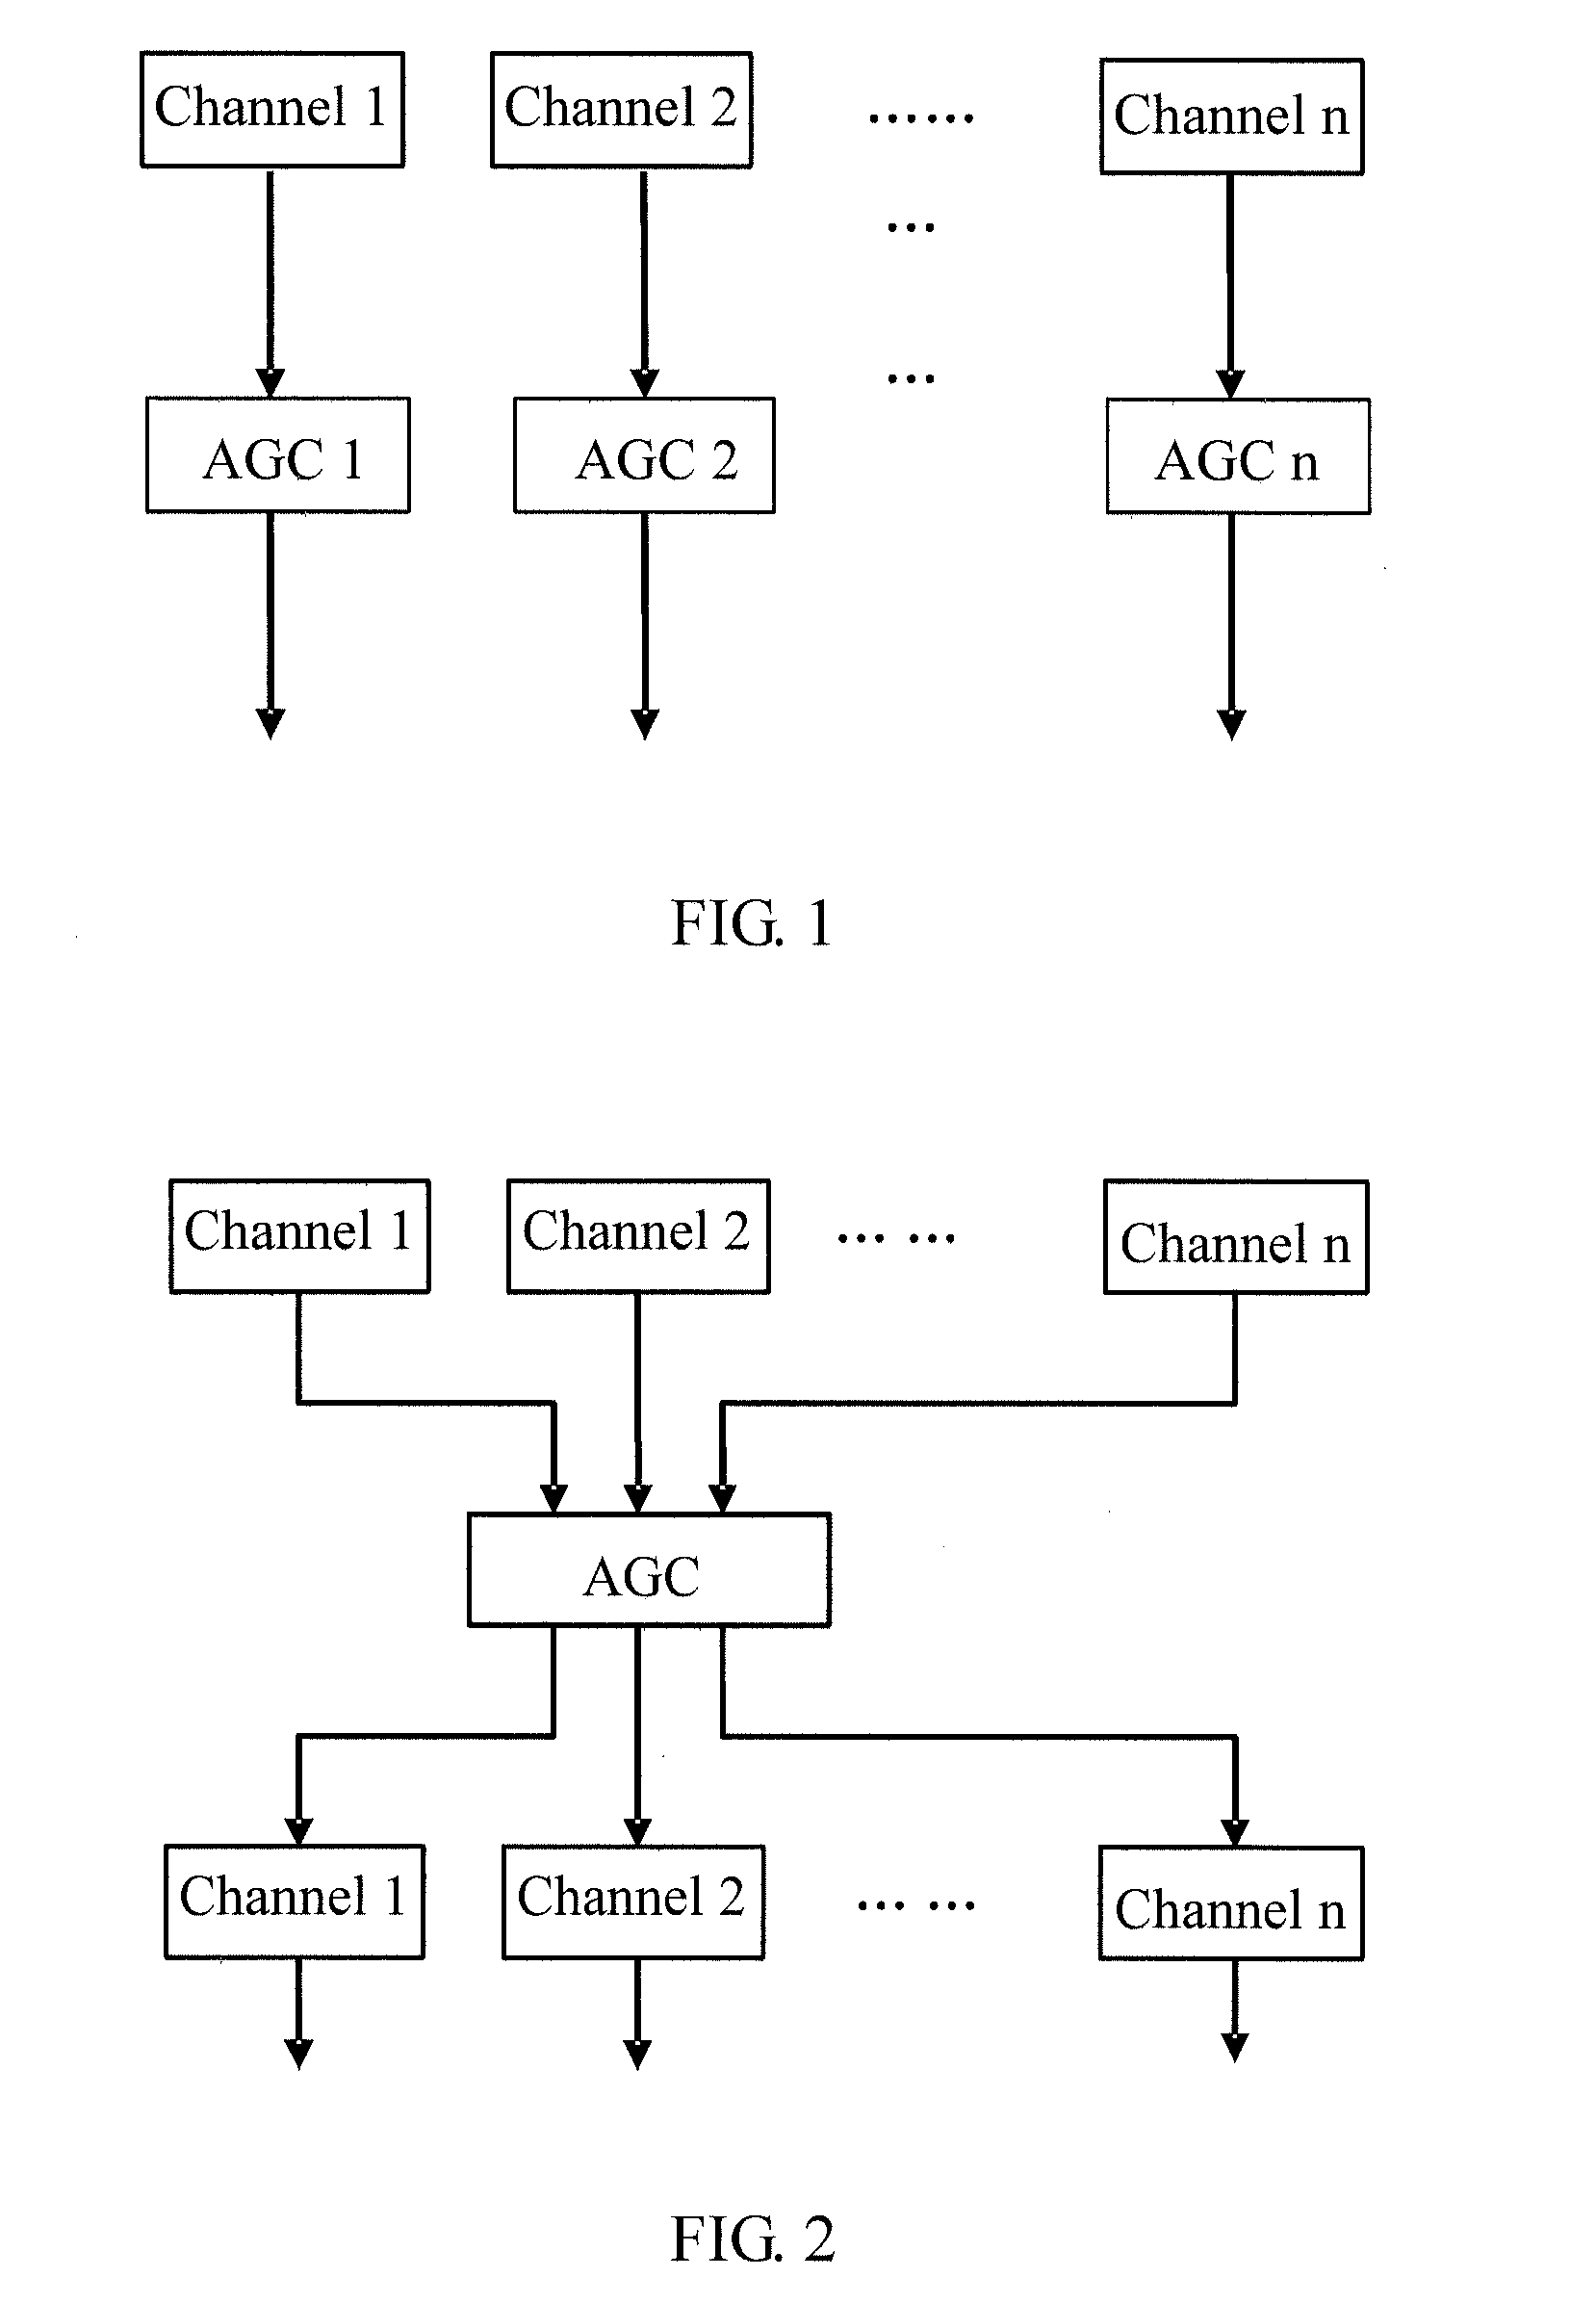 Method and apparatus for controlling gain in multi-audio channel system, and voice processing system